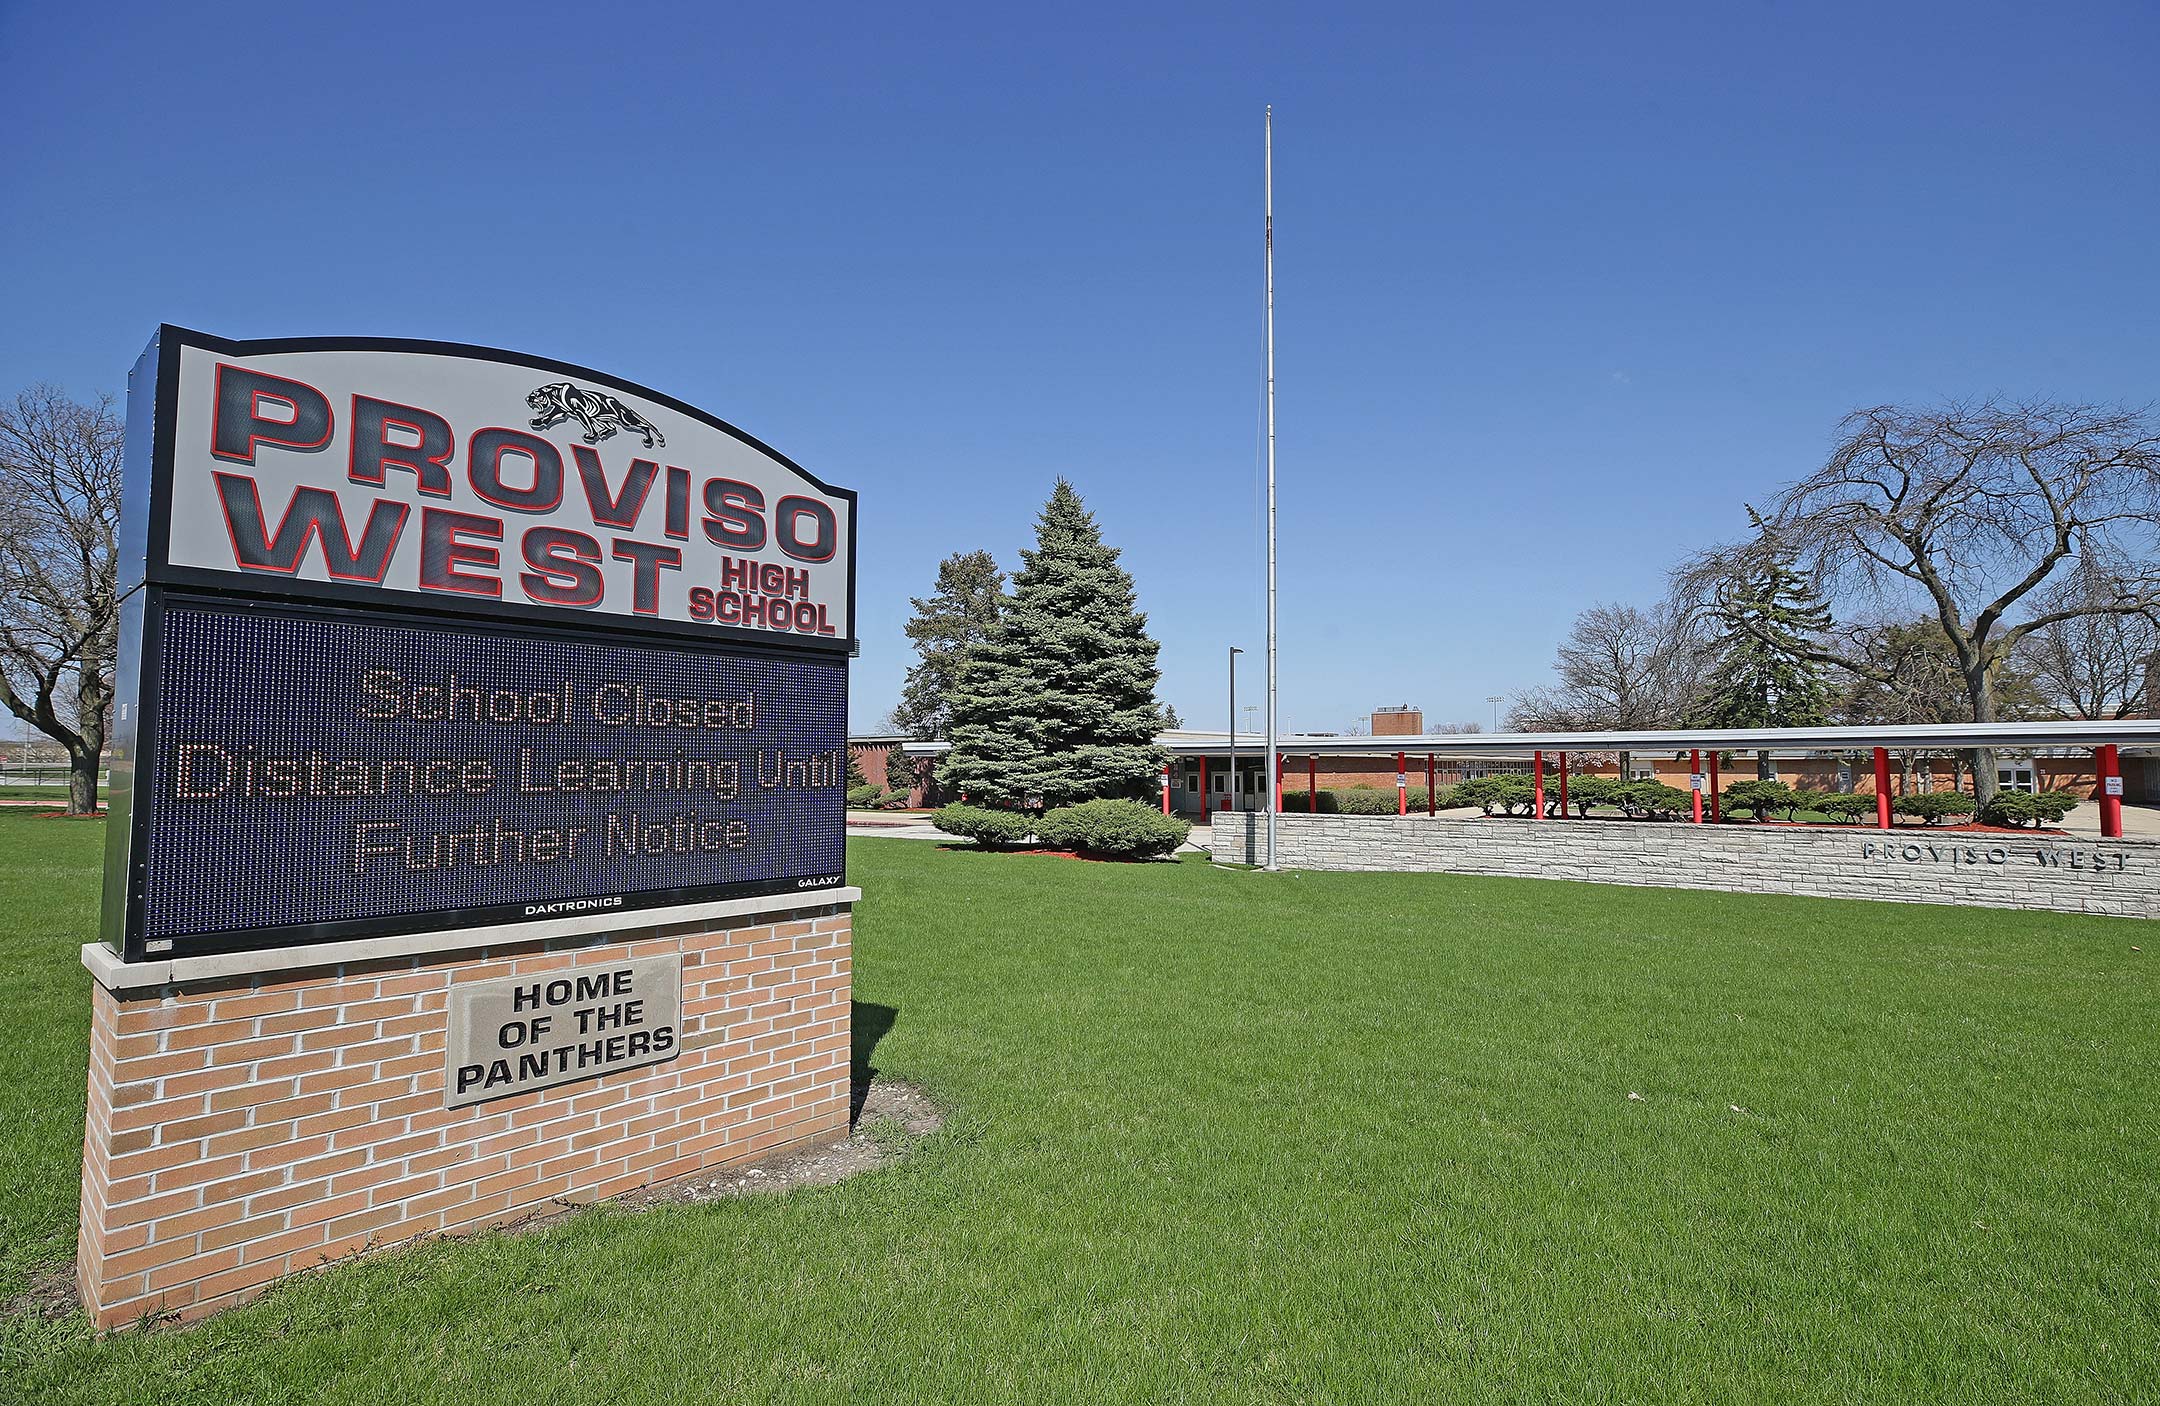 Photograph of a high school digital sign on a green and empty lawn